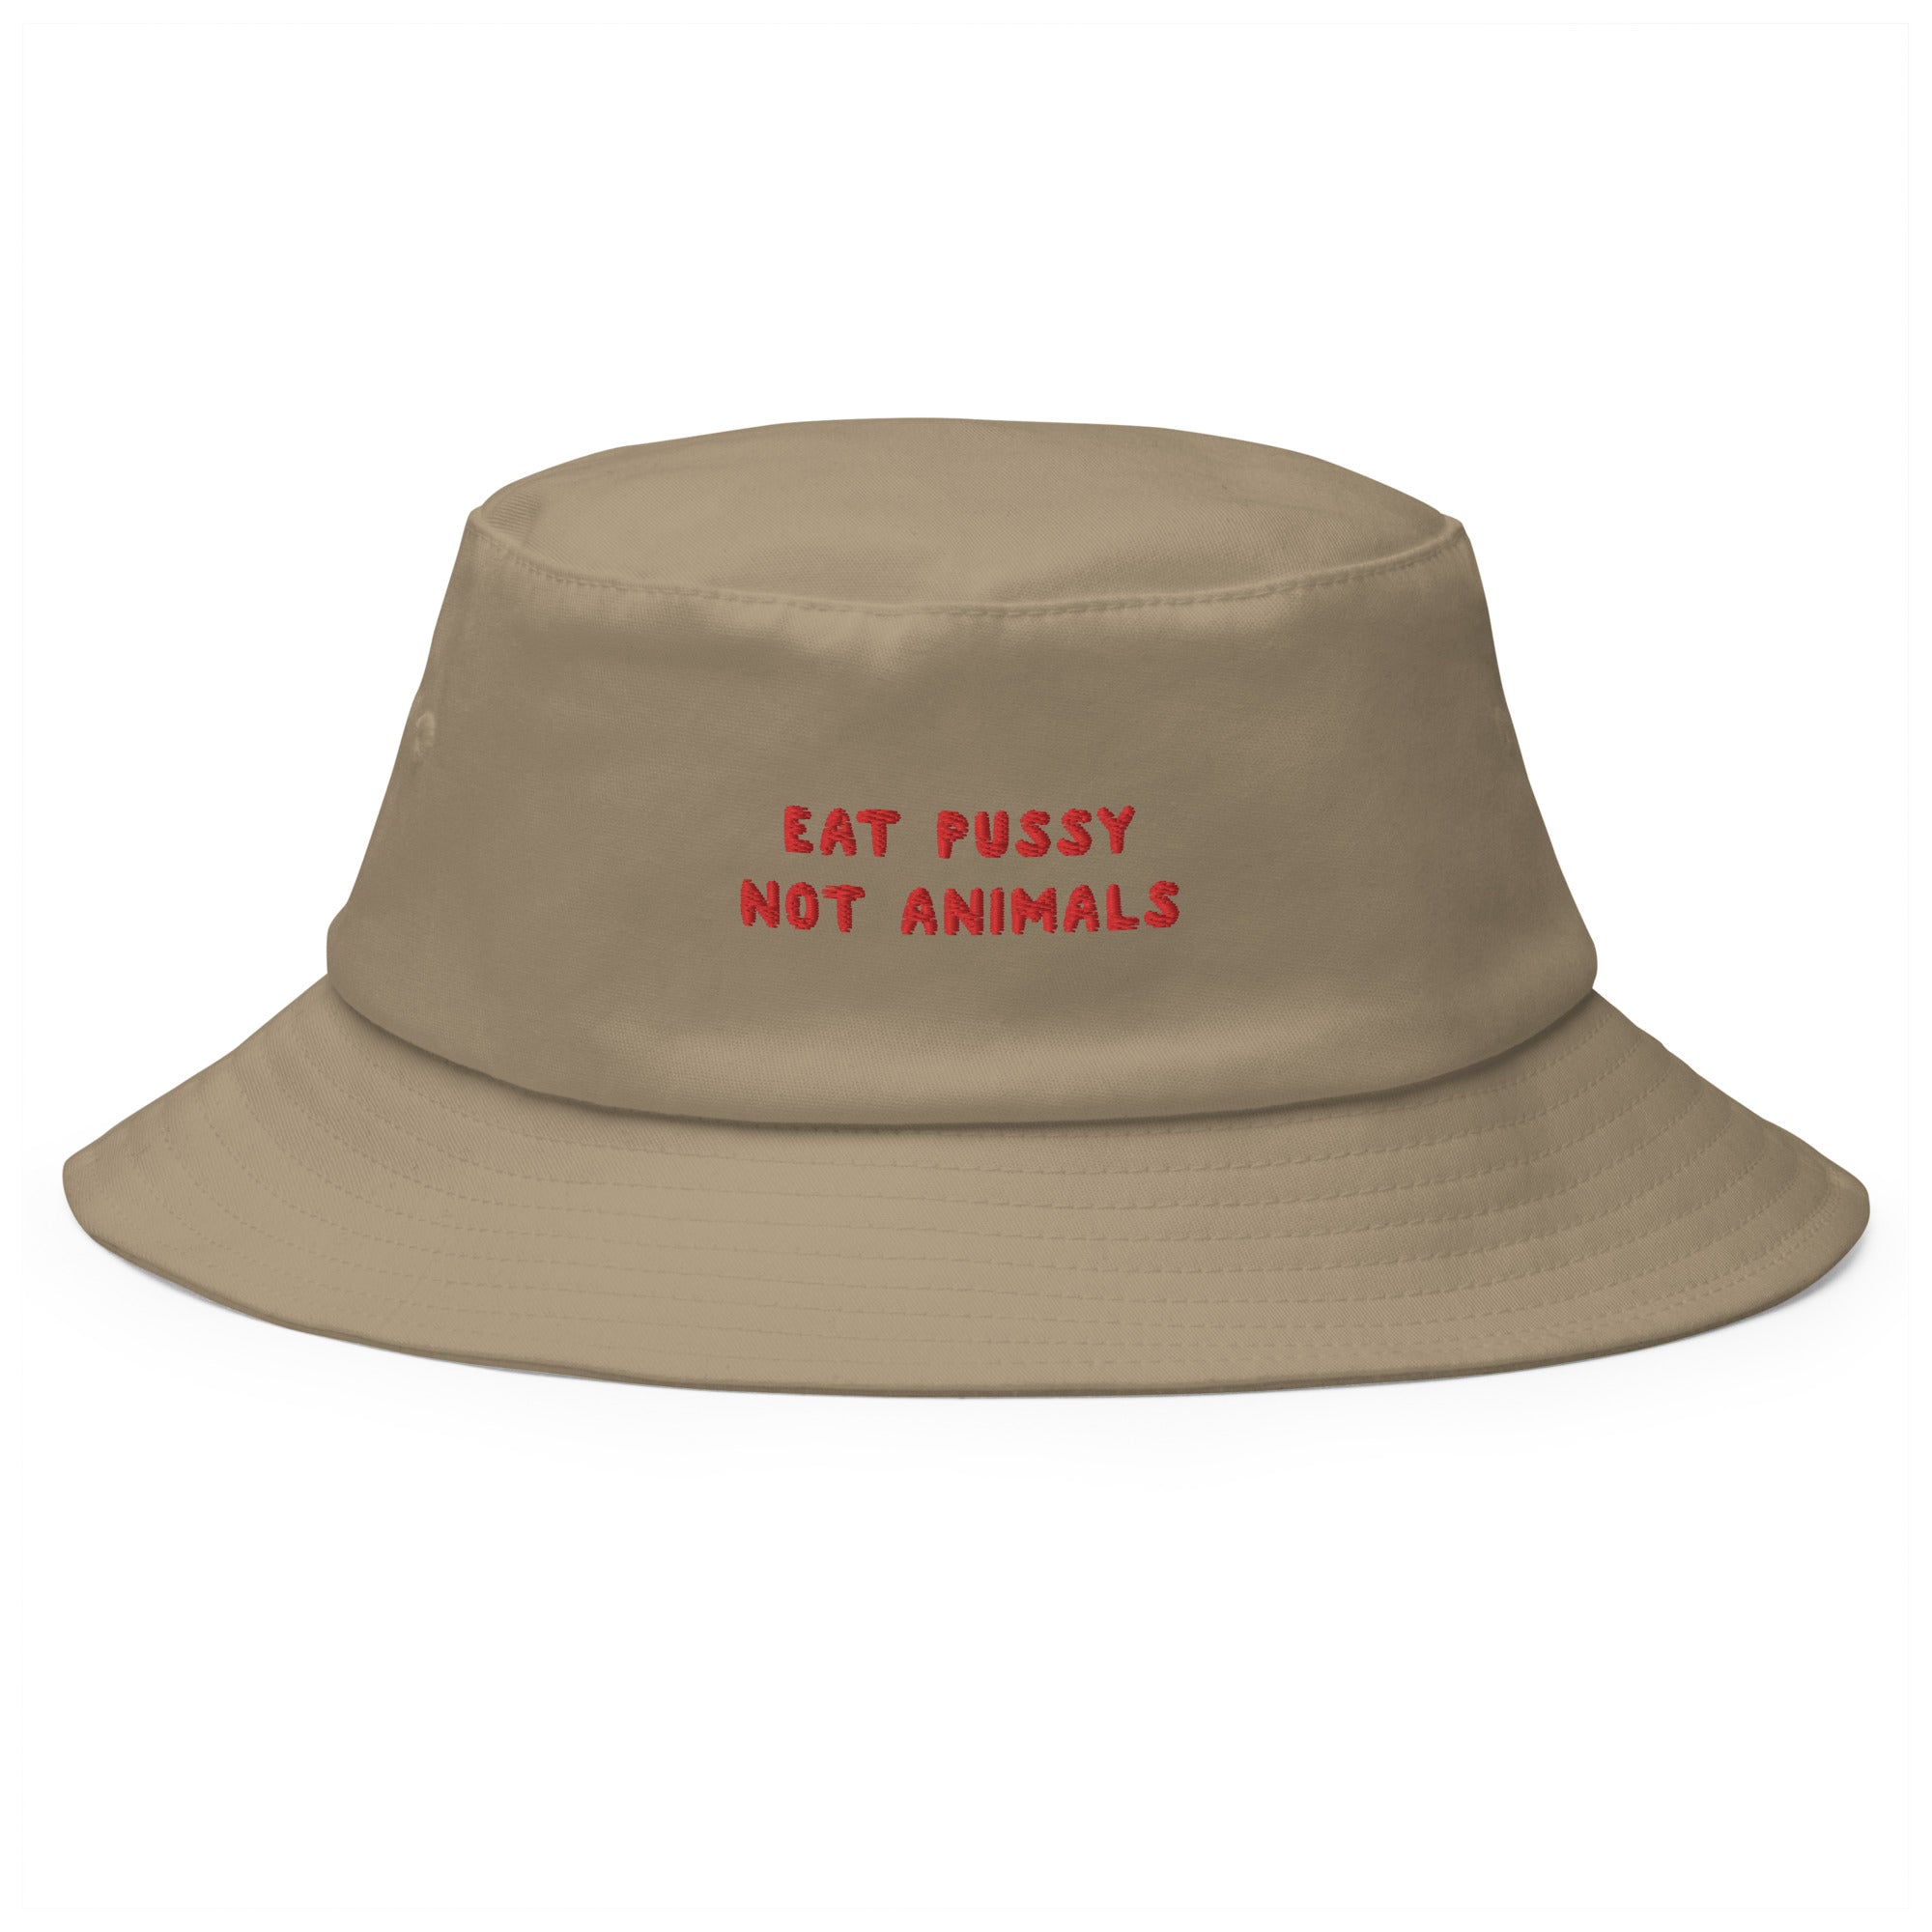 Eat Pussy not Animals - Embroidered Bucket Hat